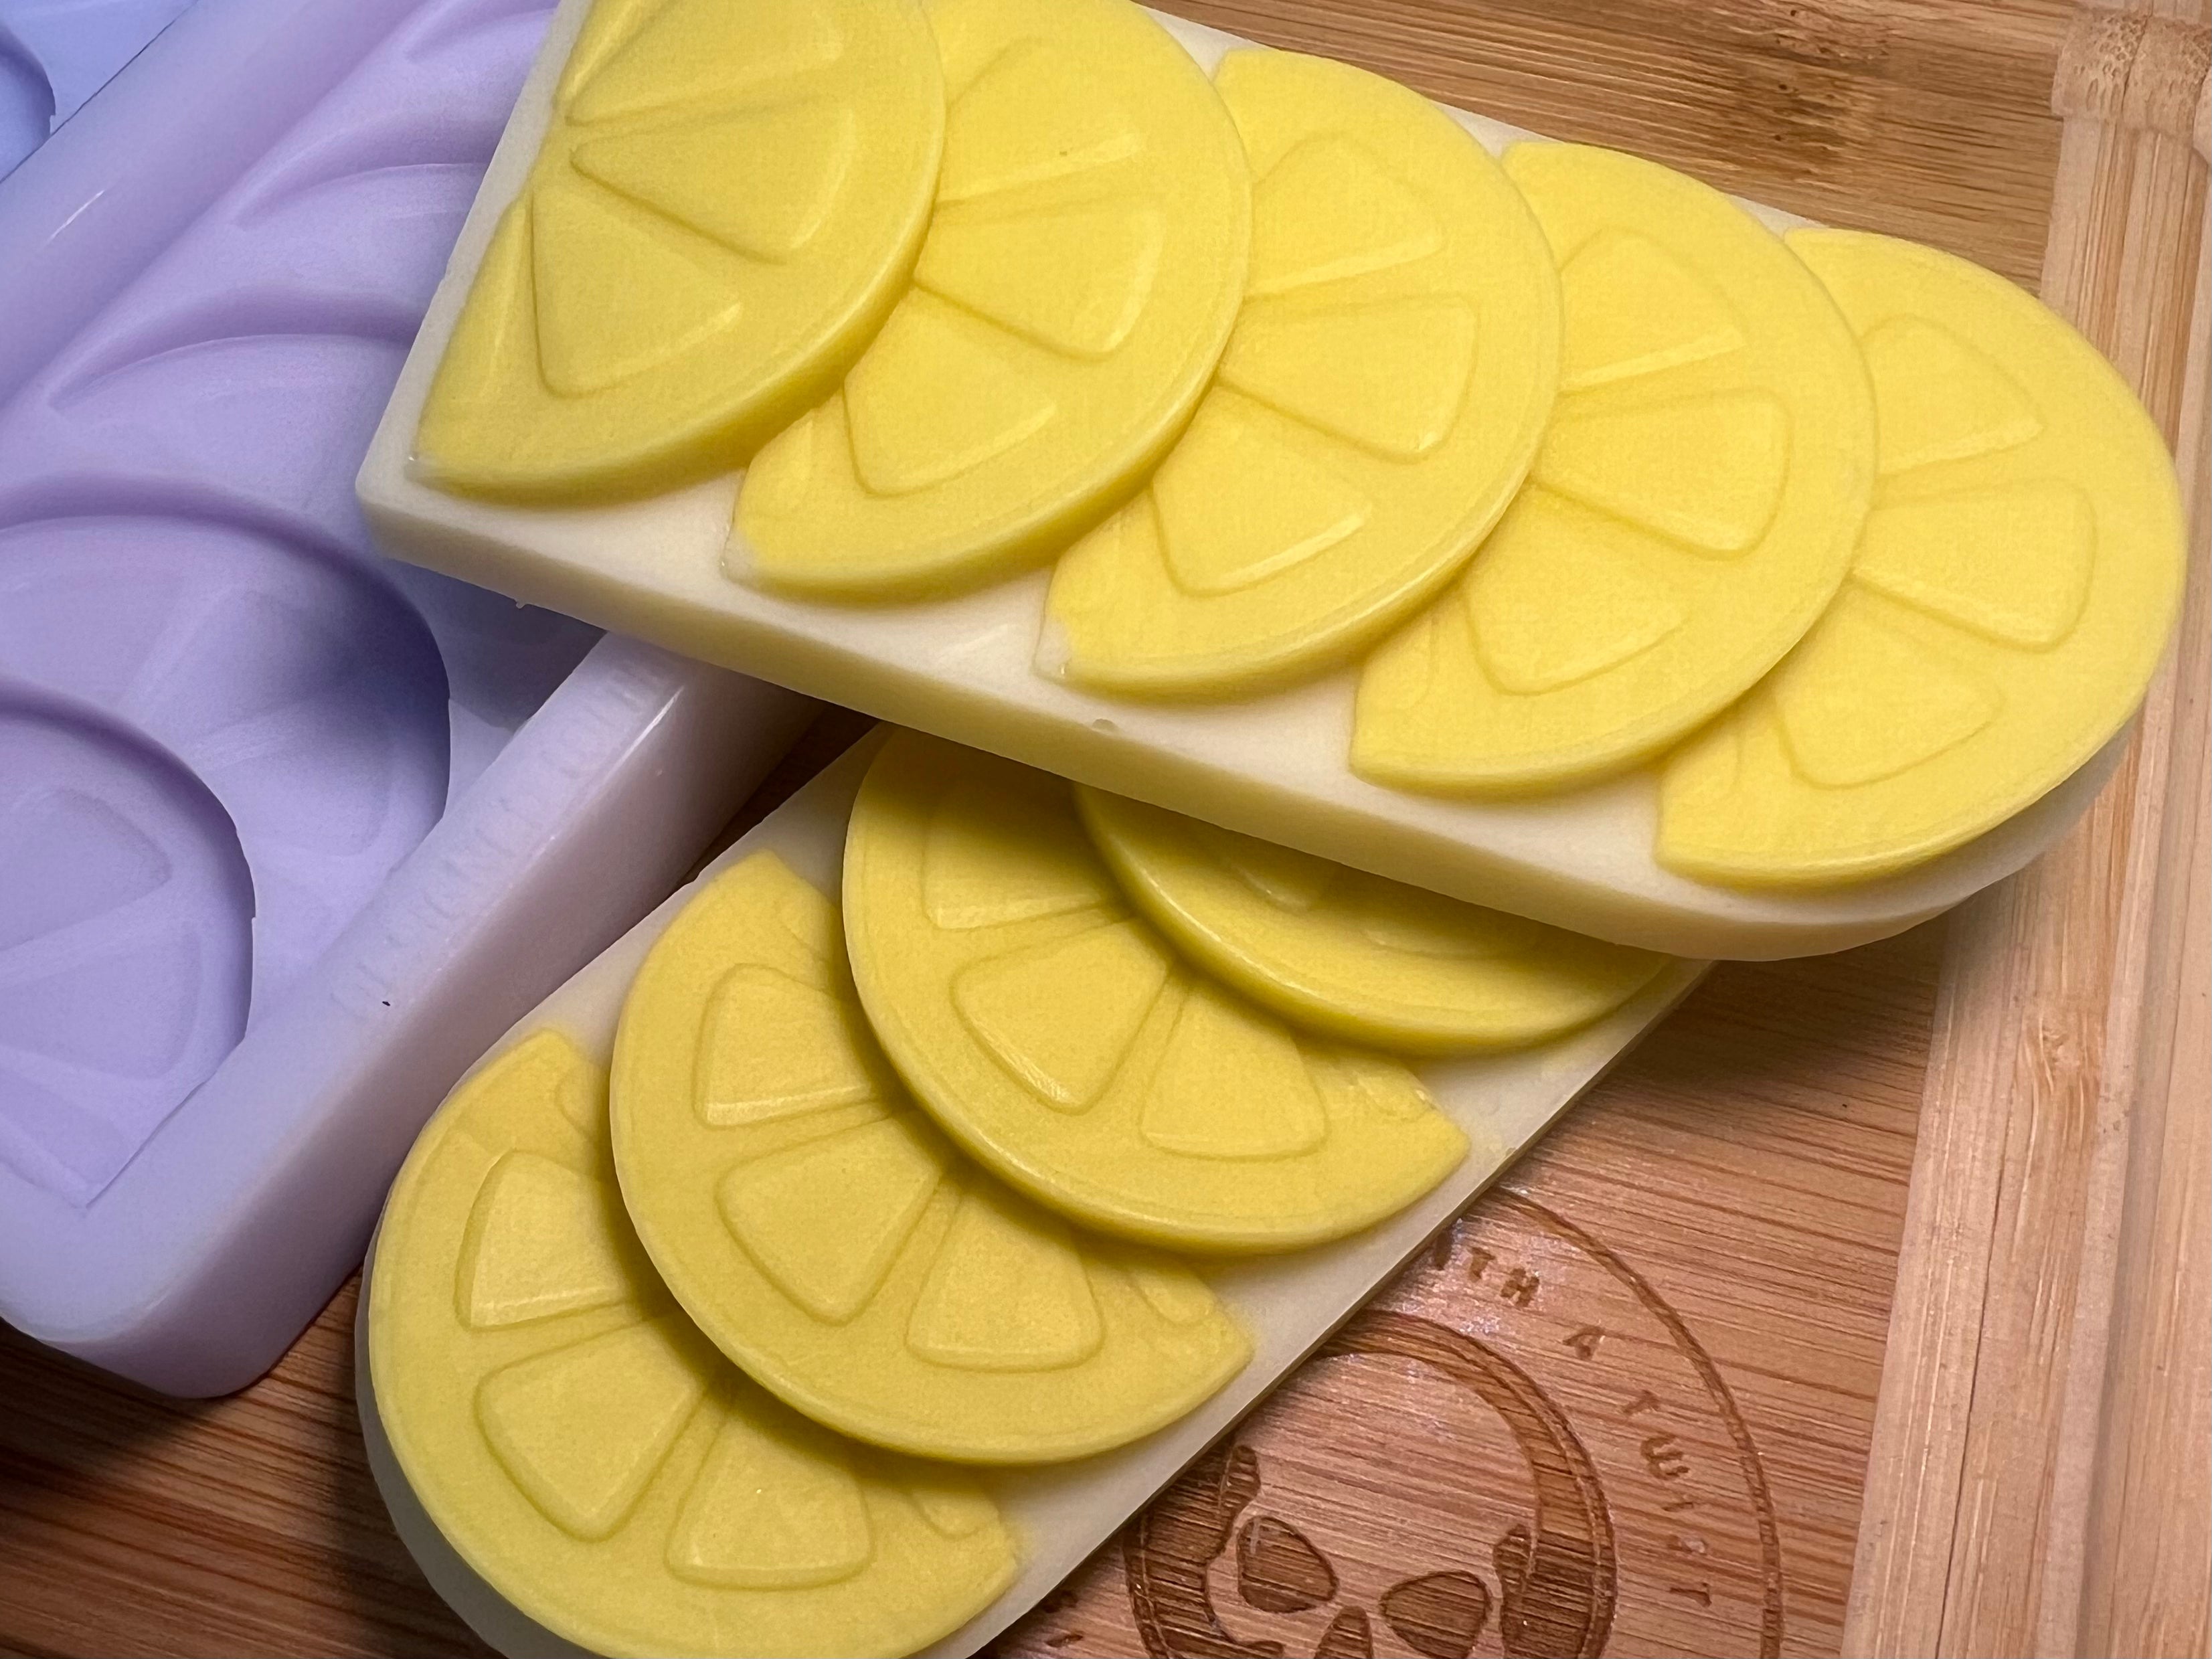 Cartoon Fruit Slice Snapbar Silicone Mold - Designed with a Twist - Top quality silicone molds made in the UK.